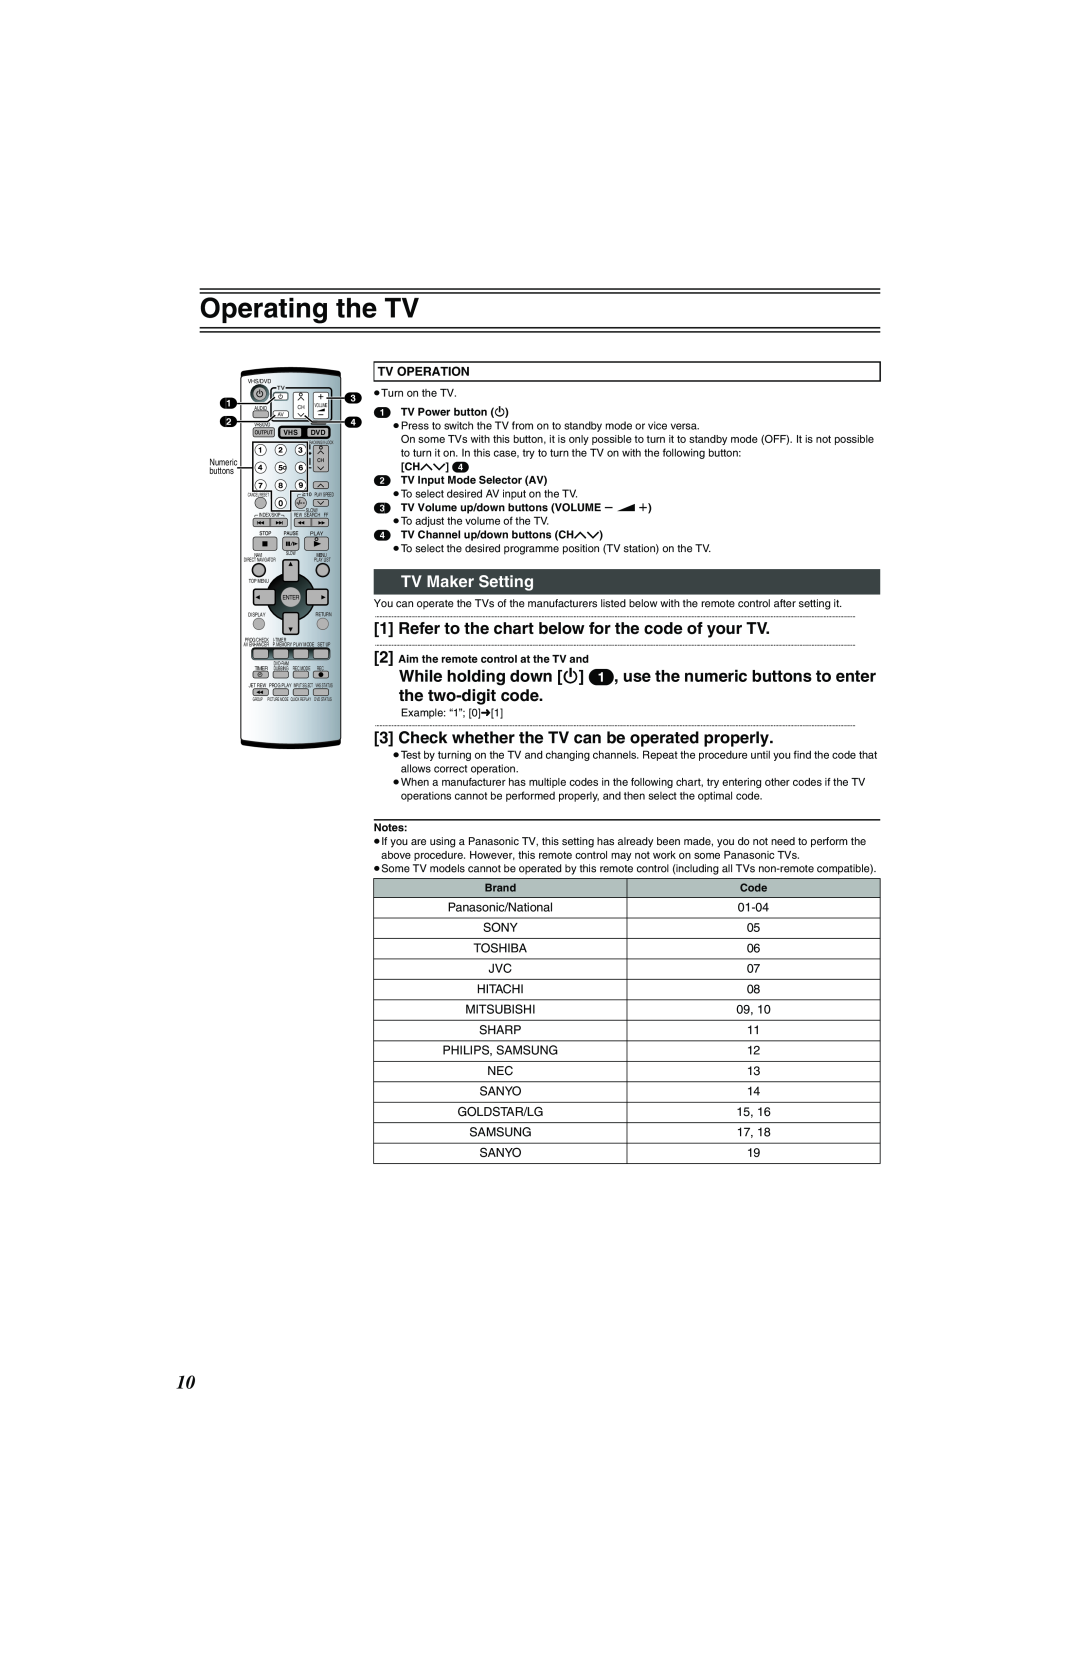 Panasonic NV-VP32 Series manual Operating the TV, TV Maker Setting, Refer to the chart below for the code of your TV 